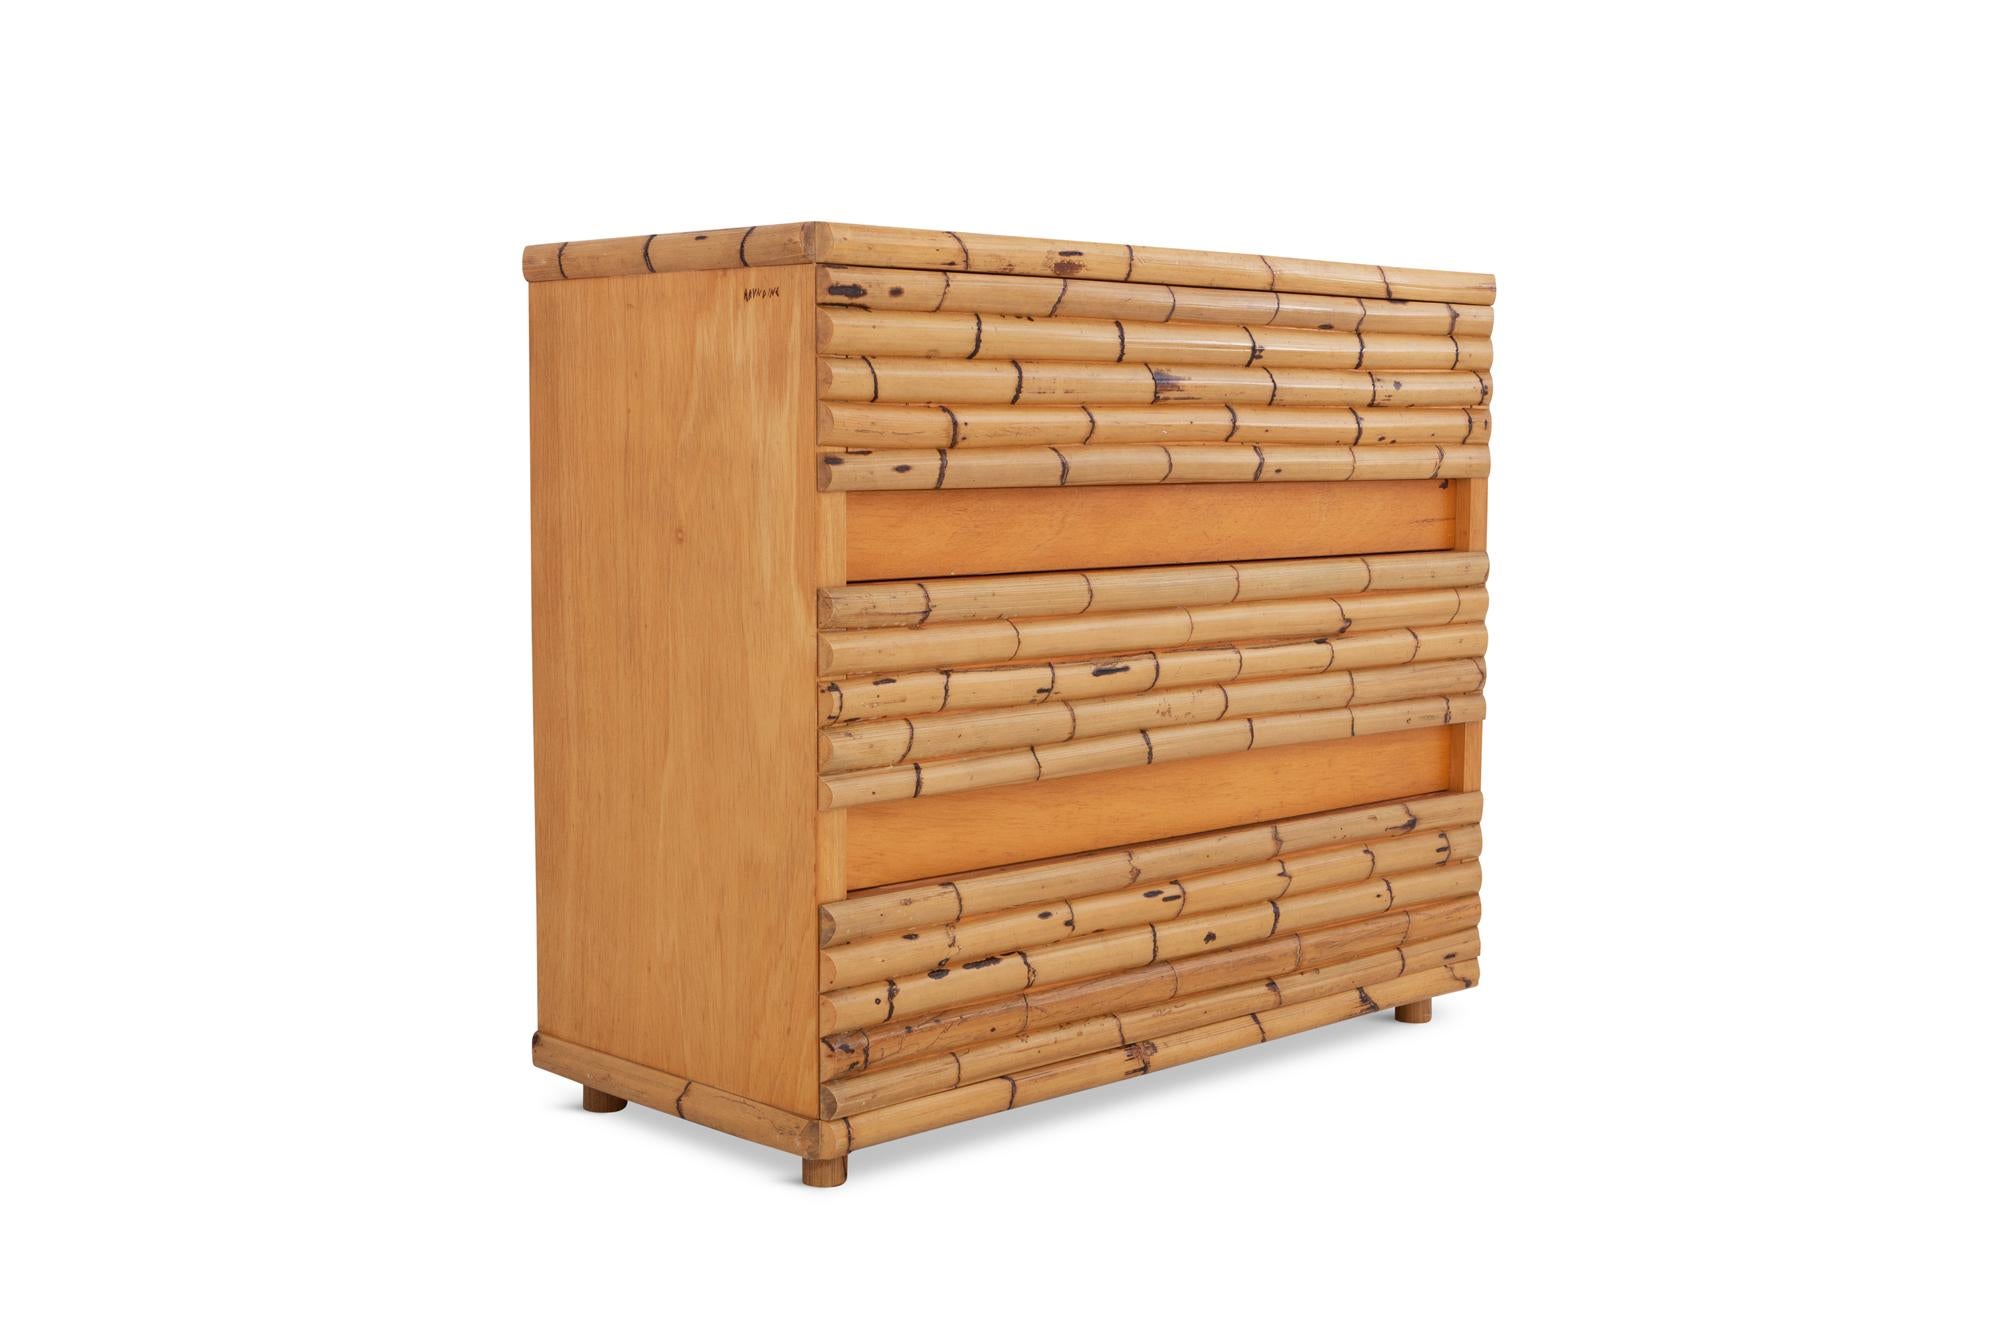 Hollywood regency mid-century modern Bamboo chest of drawers designed by Italian architect Venturini from Florence.  High quality piece made out of 3 larger drawers, finished with Bamboo.  

Would work well in a Gabriella Crespi inspired tropical